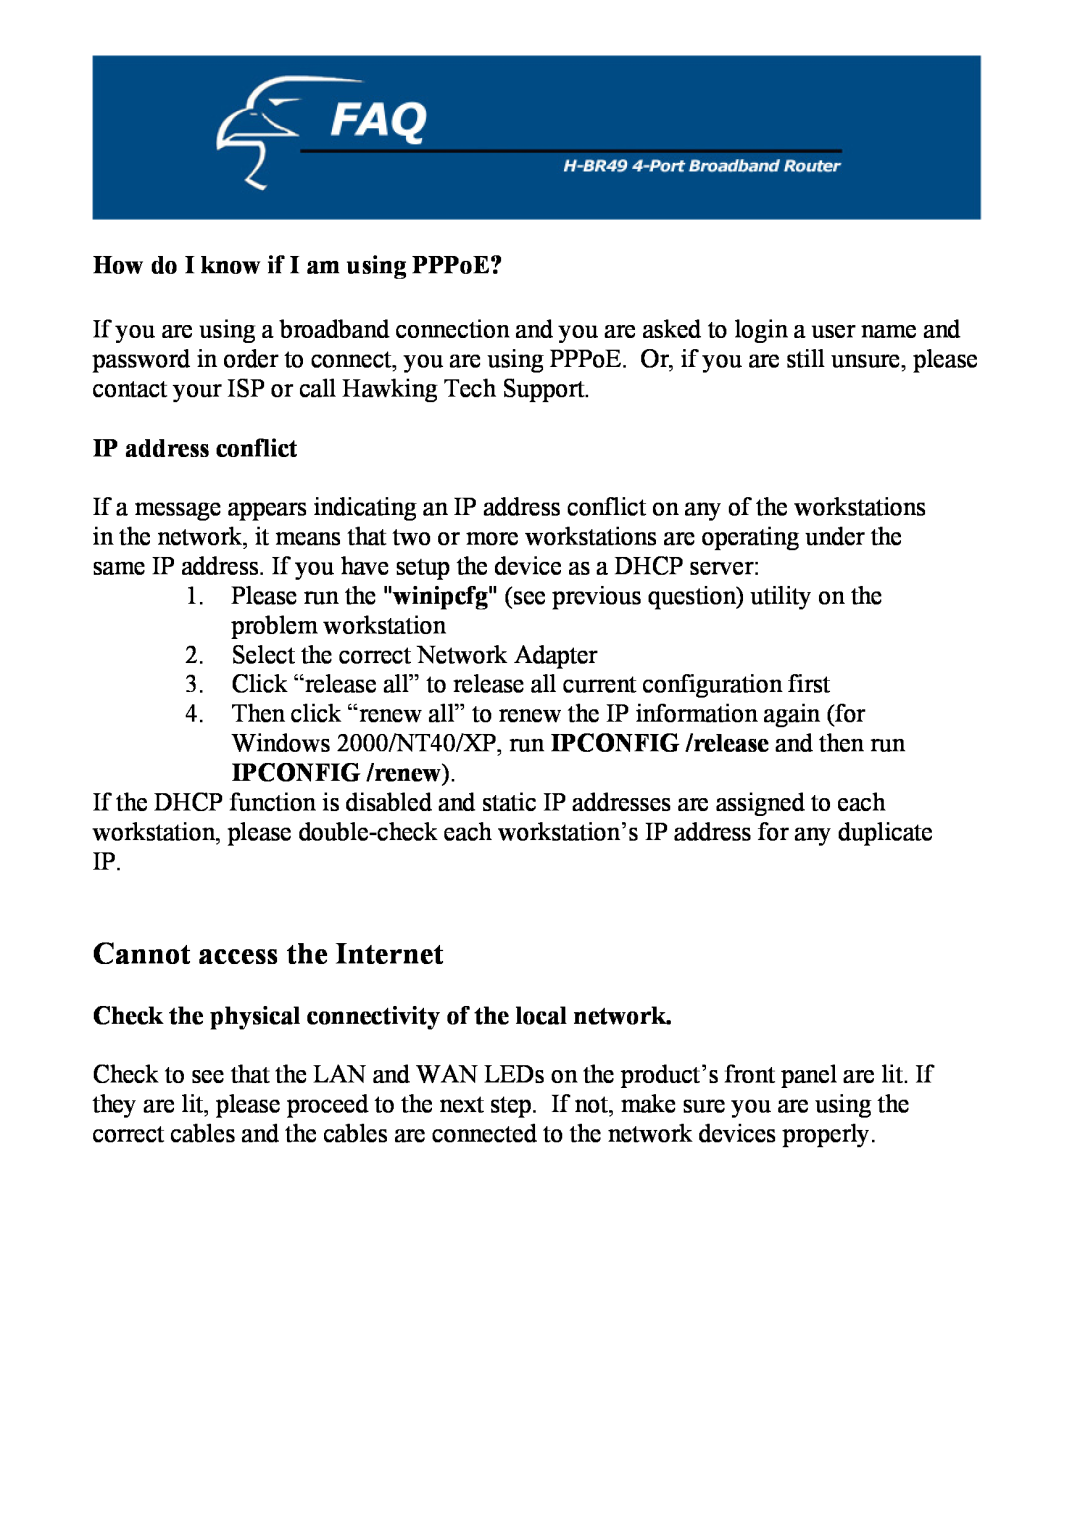 Hawking Technology H-BR49 manual Cannot access the Internet, How do I know if I am using PPPoE?, IP address conflict 